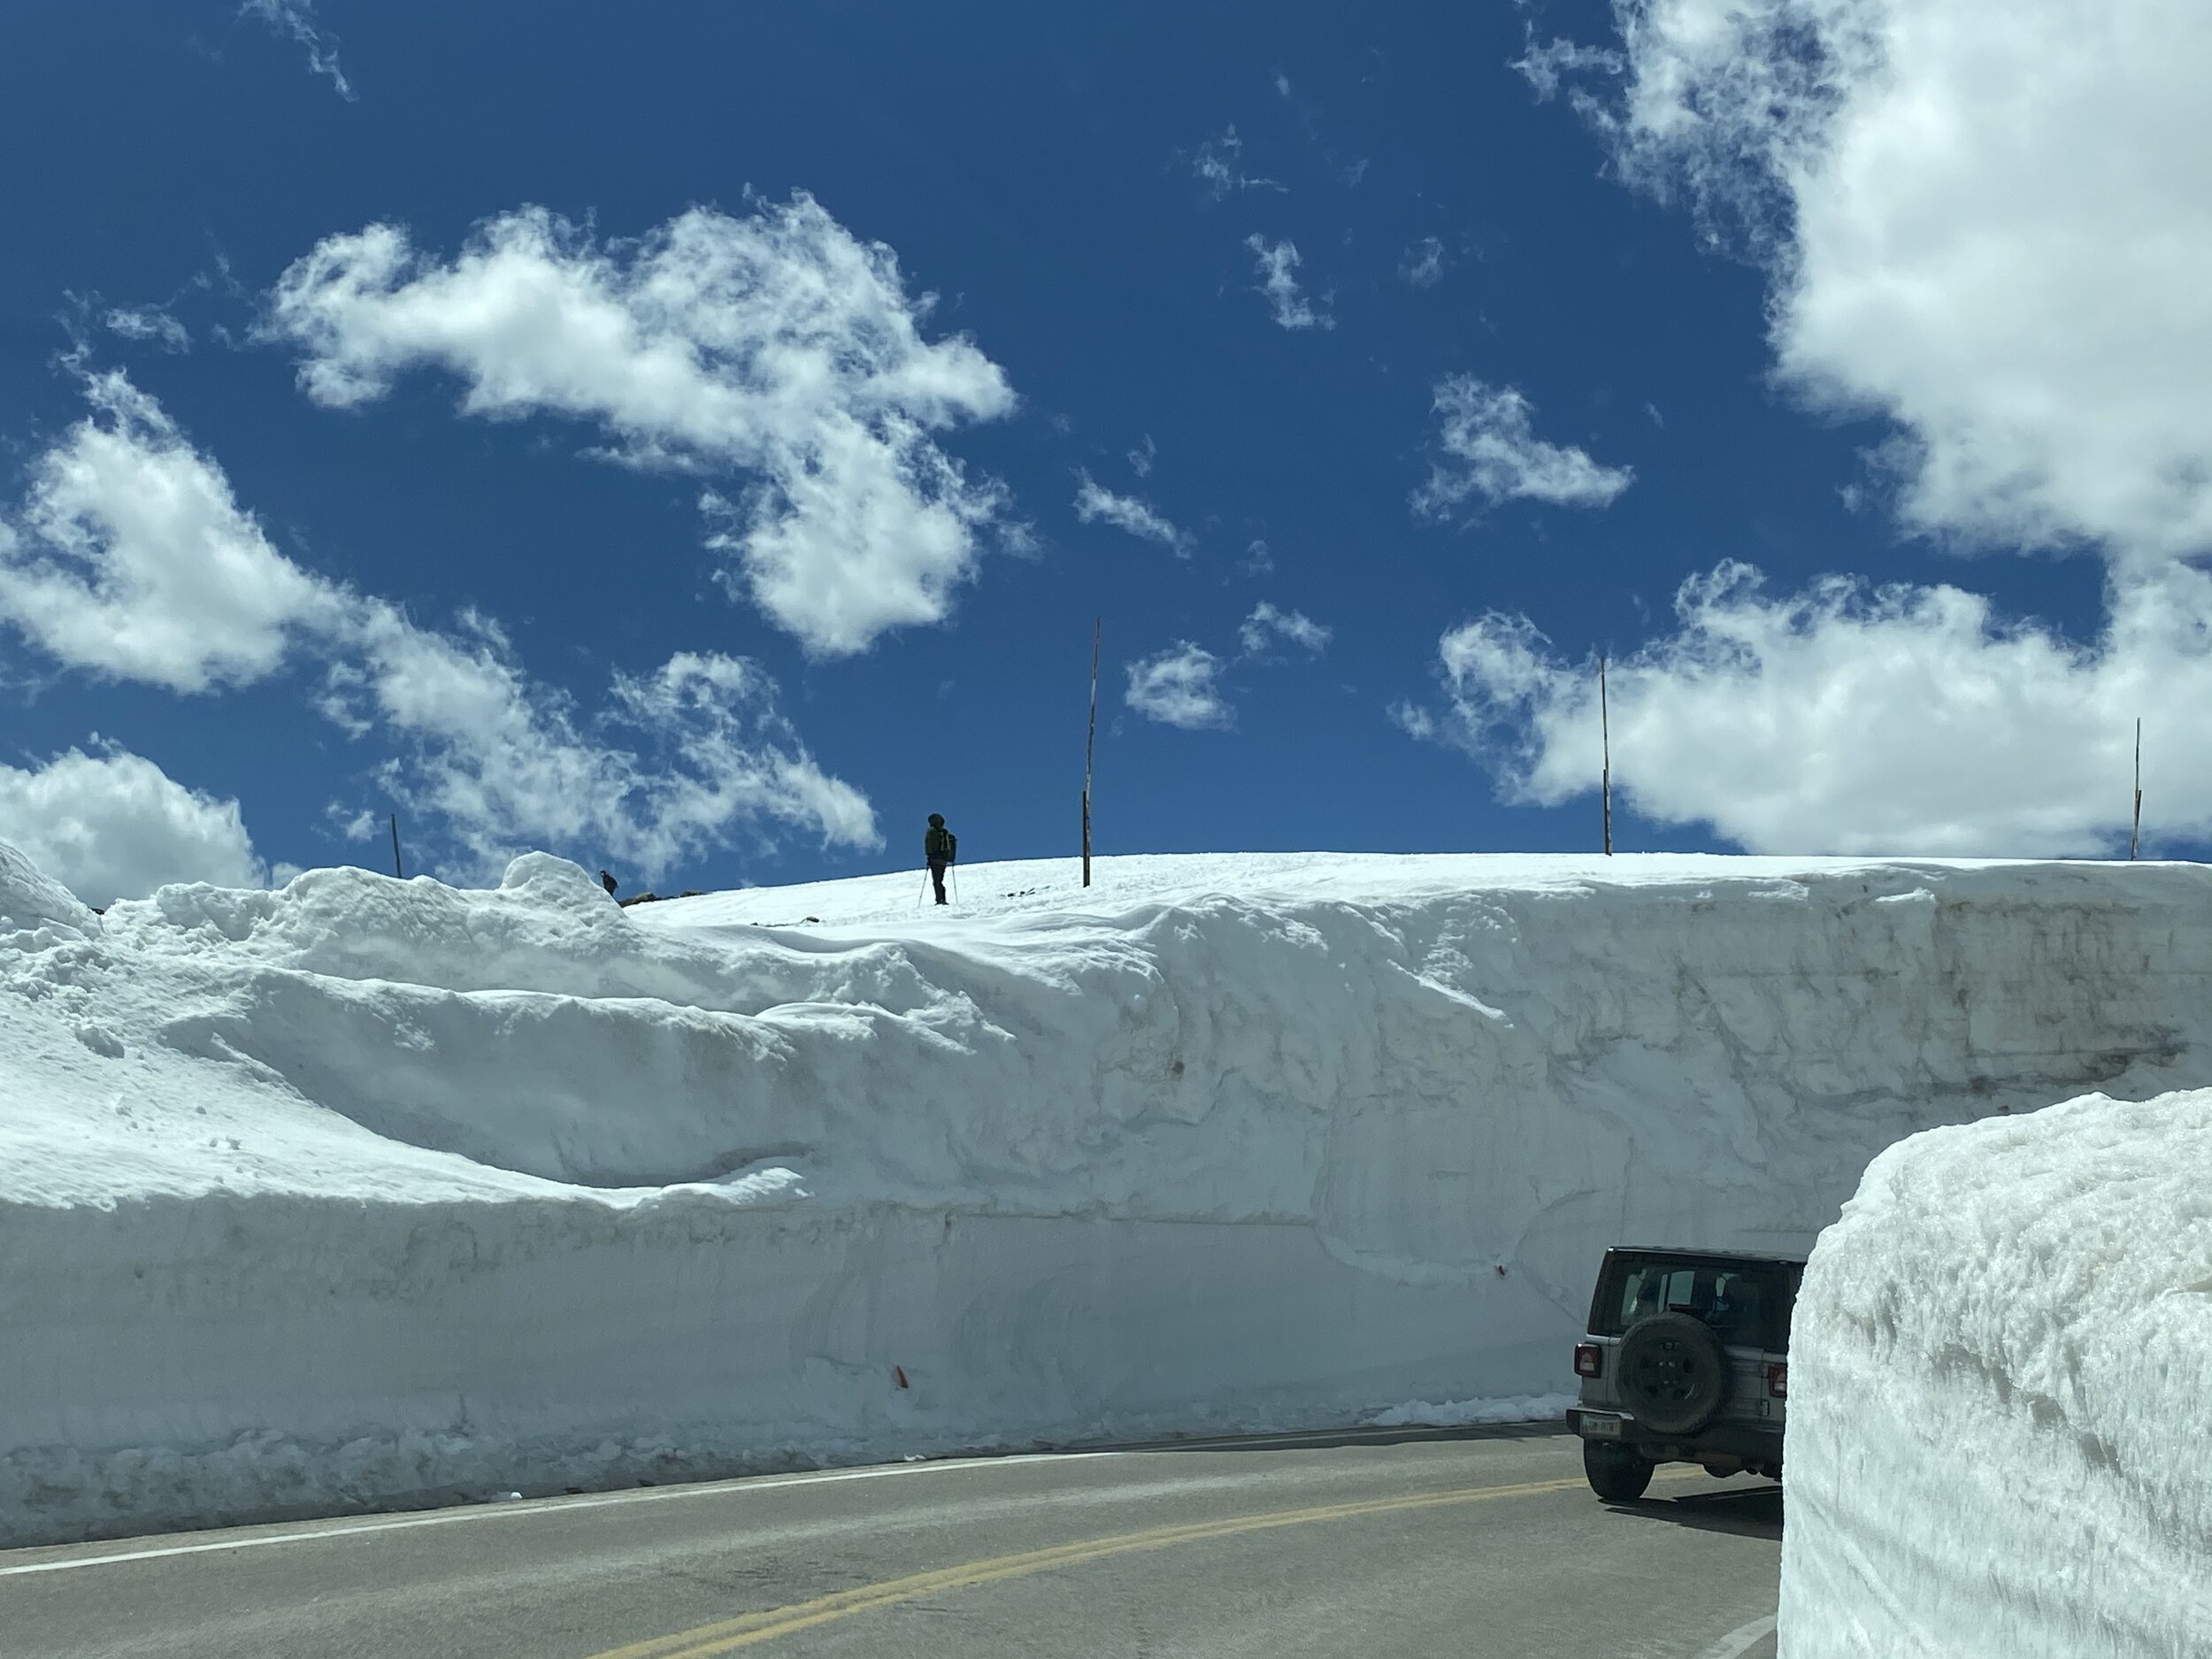 Snow still a bit deep just the day after Beartooth Pass opened for the season.  Photo by Karen Boudreaux, May 29, 2021